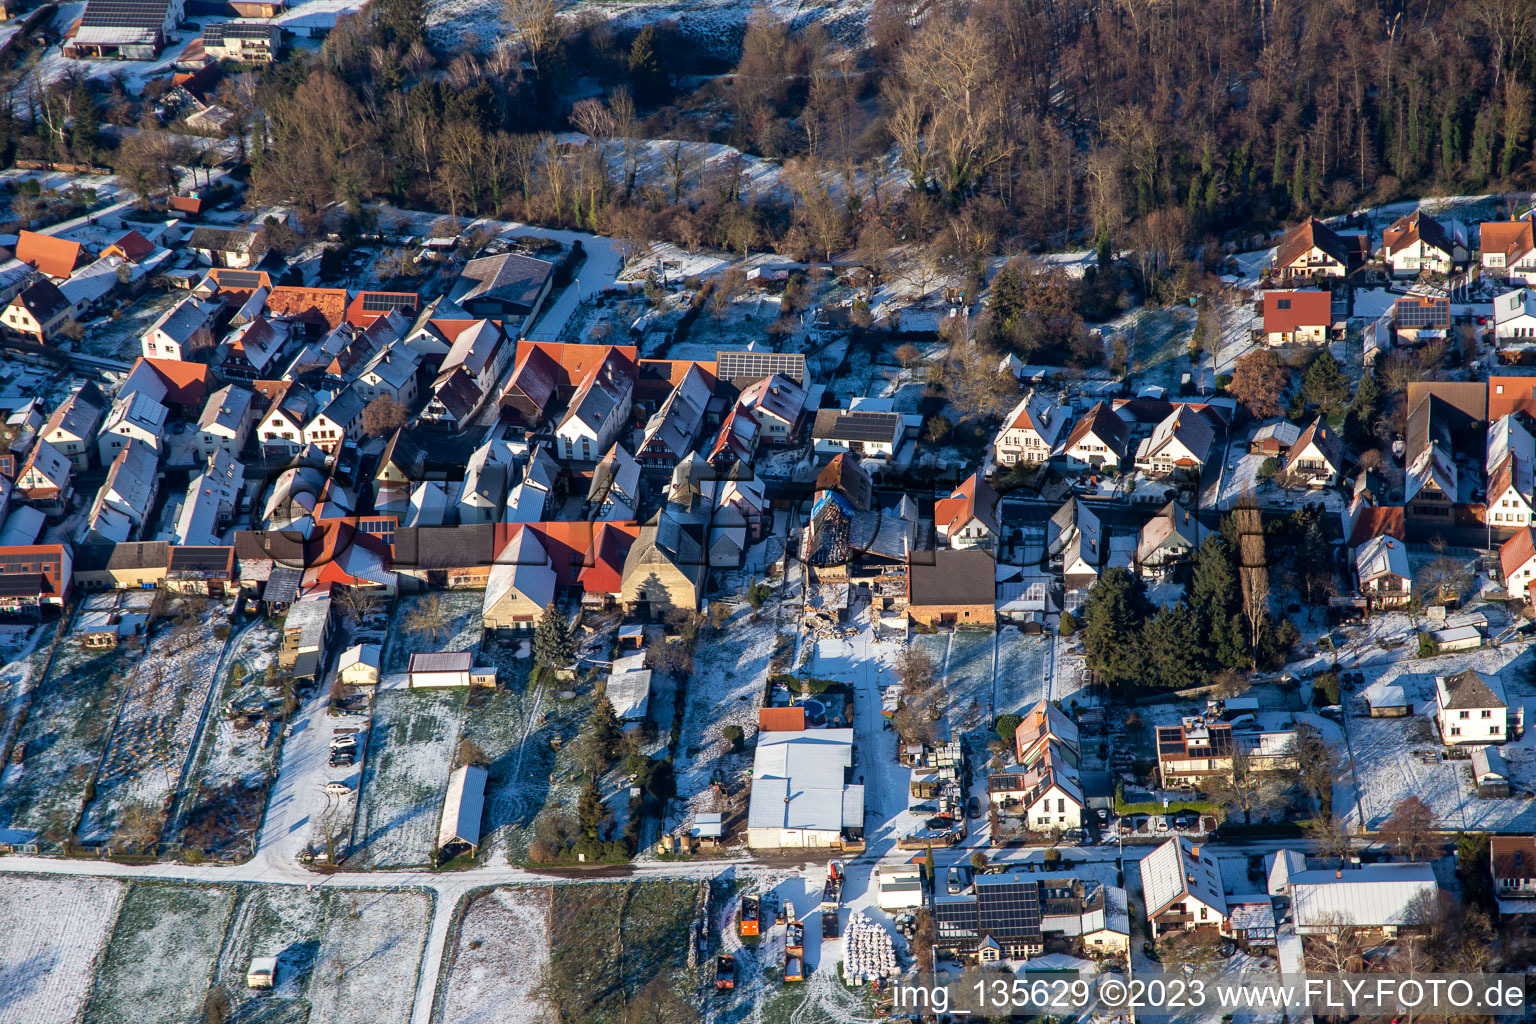 Aerial view of In winter when there is snow in Winden in the state Rhineland-Palatinate, Germany